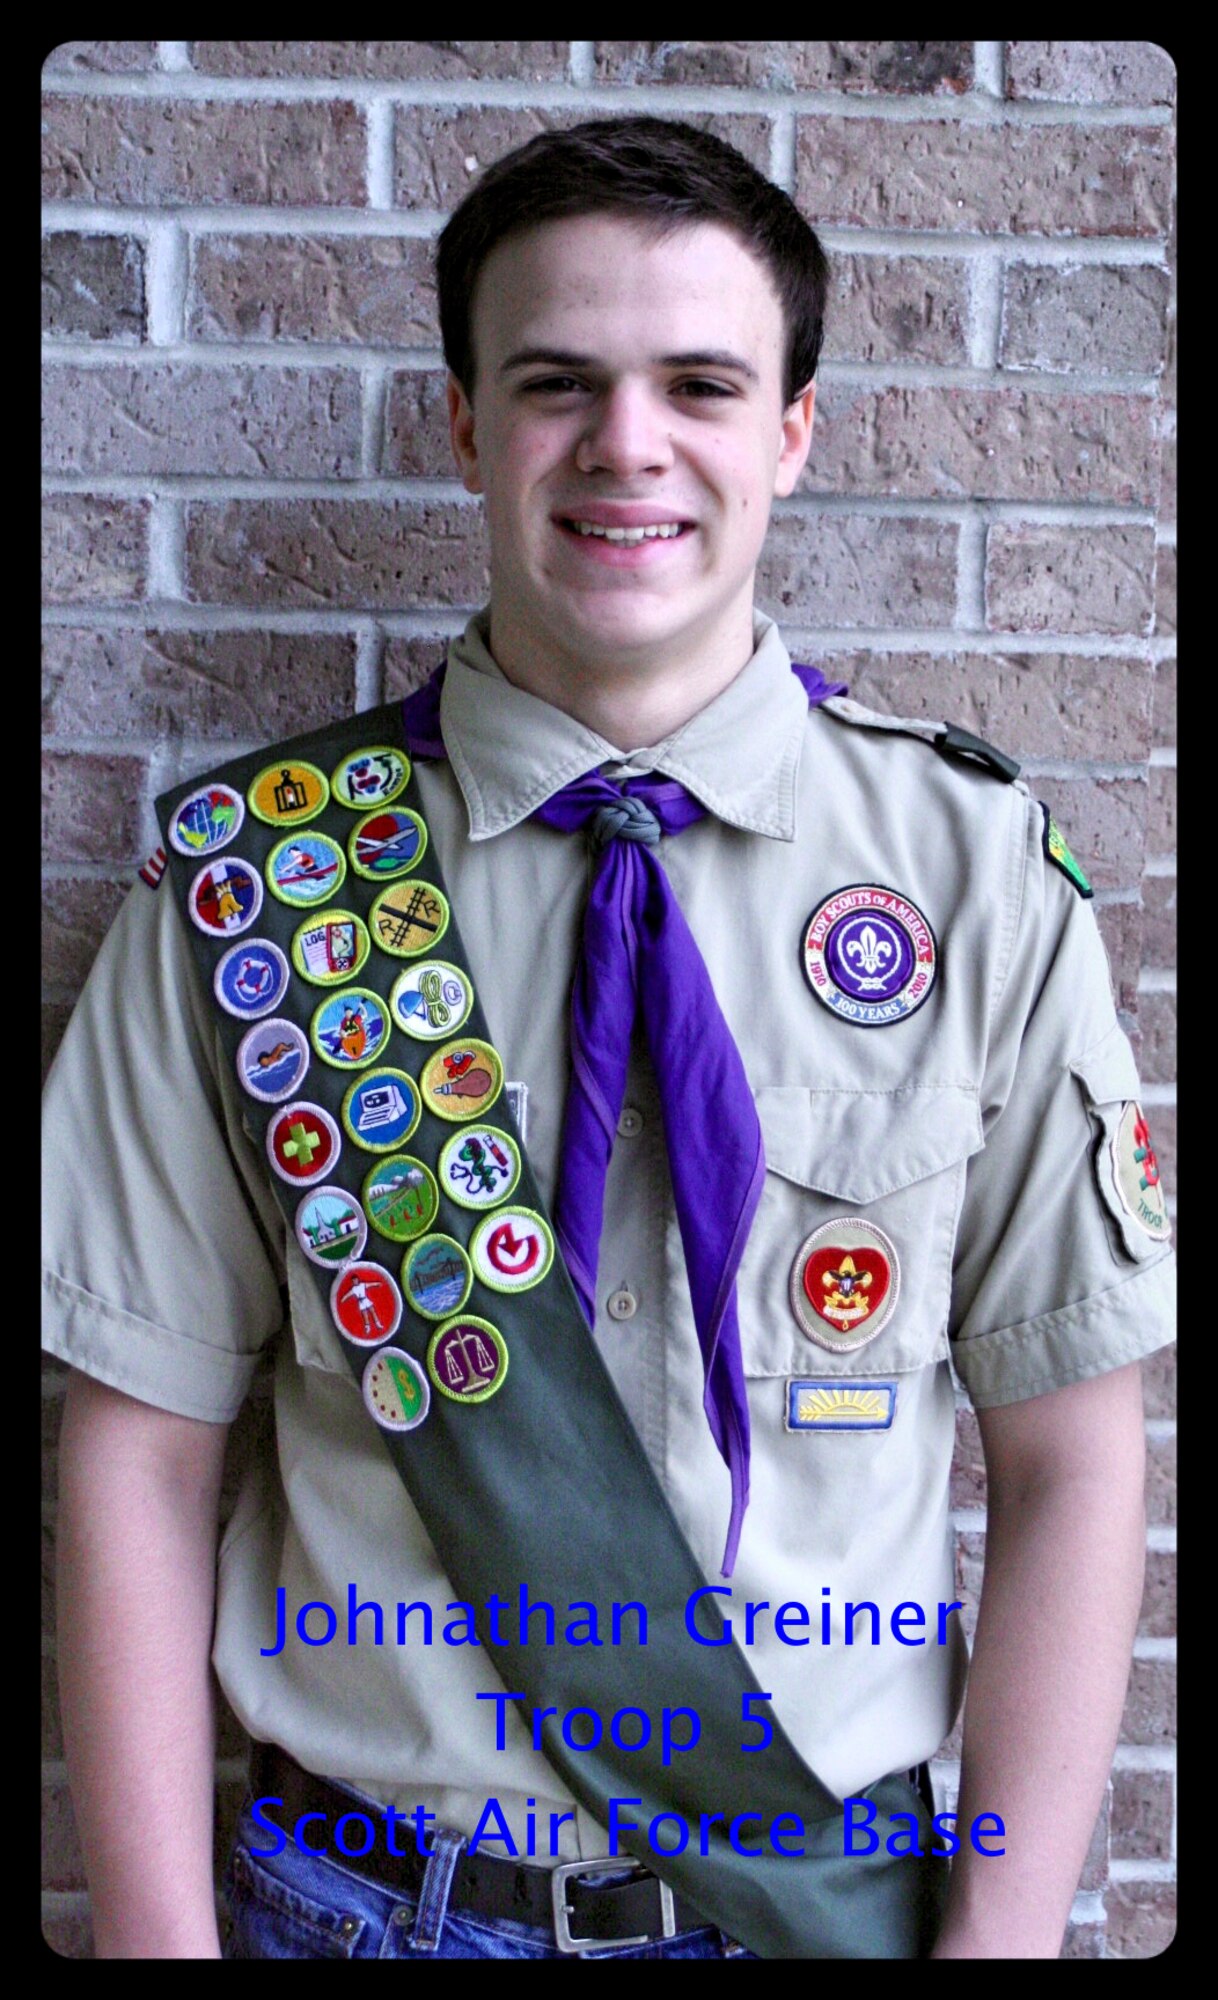 Johnathon Greiner created an Eagle Scout project to provide deployed troops with care packages. Beginning December members of Team Scott are encouraged to donate items at the base commissary.  Greiner has already collect nearly 40 packages to send to troops by March. 